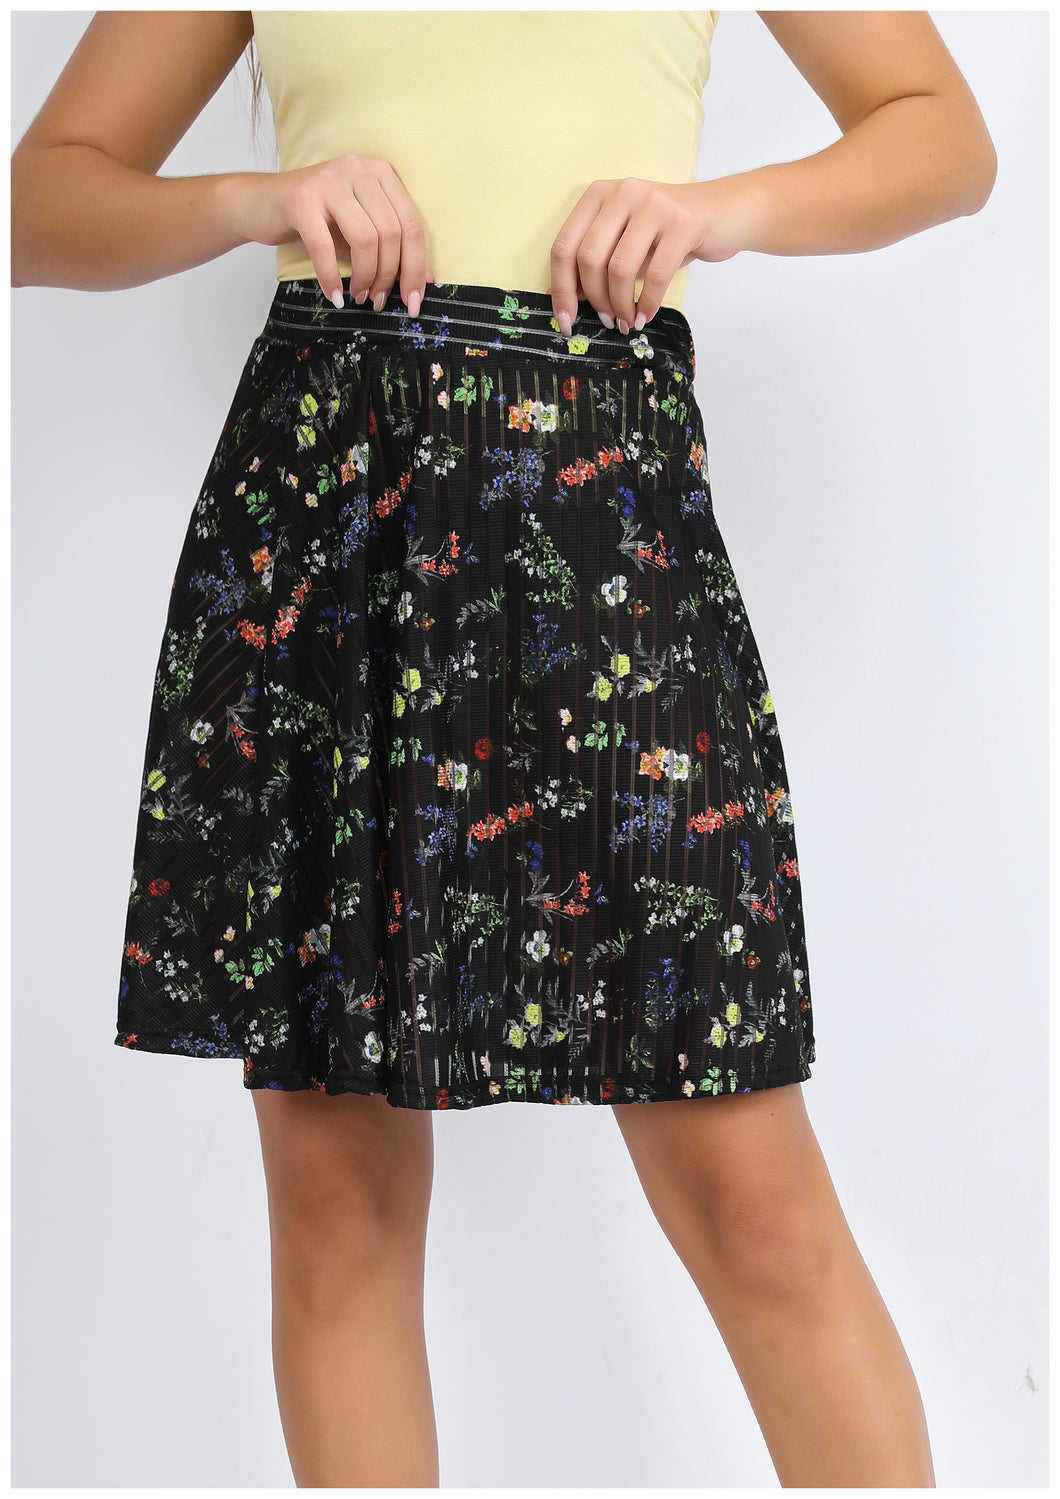 Black skirt with rose patterns